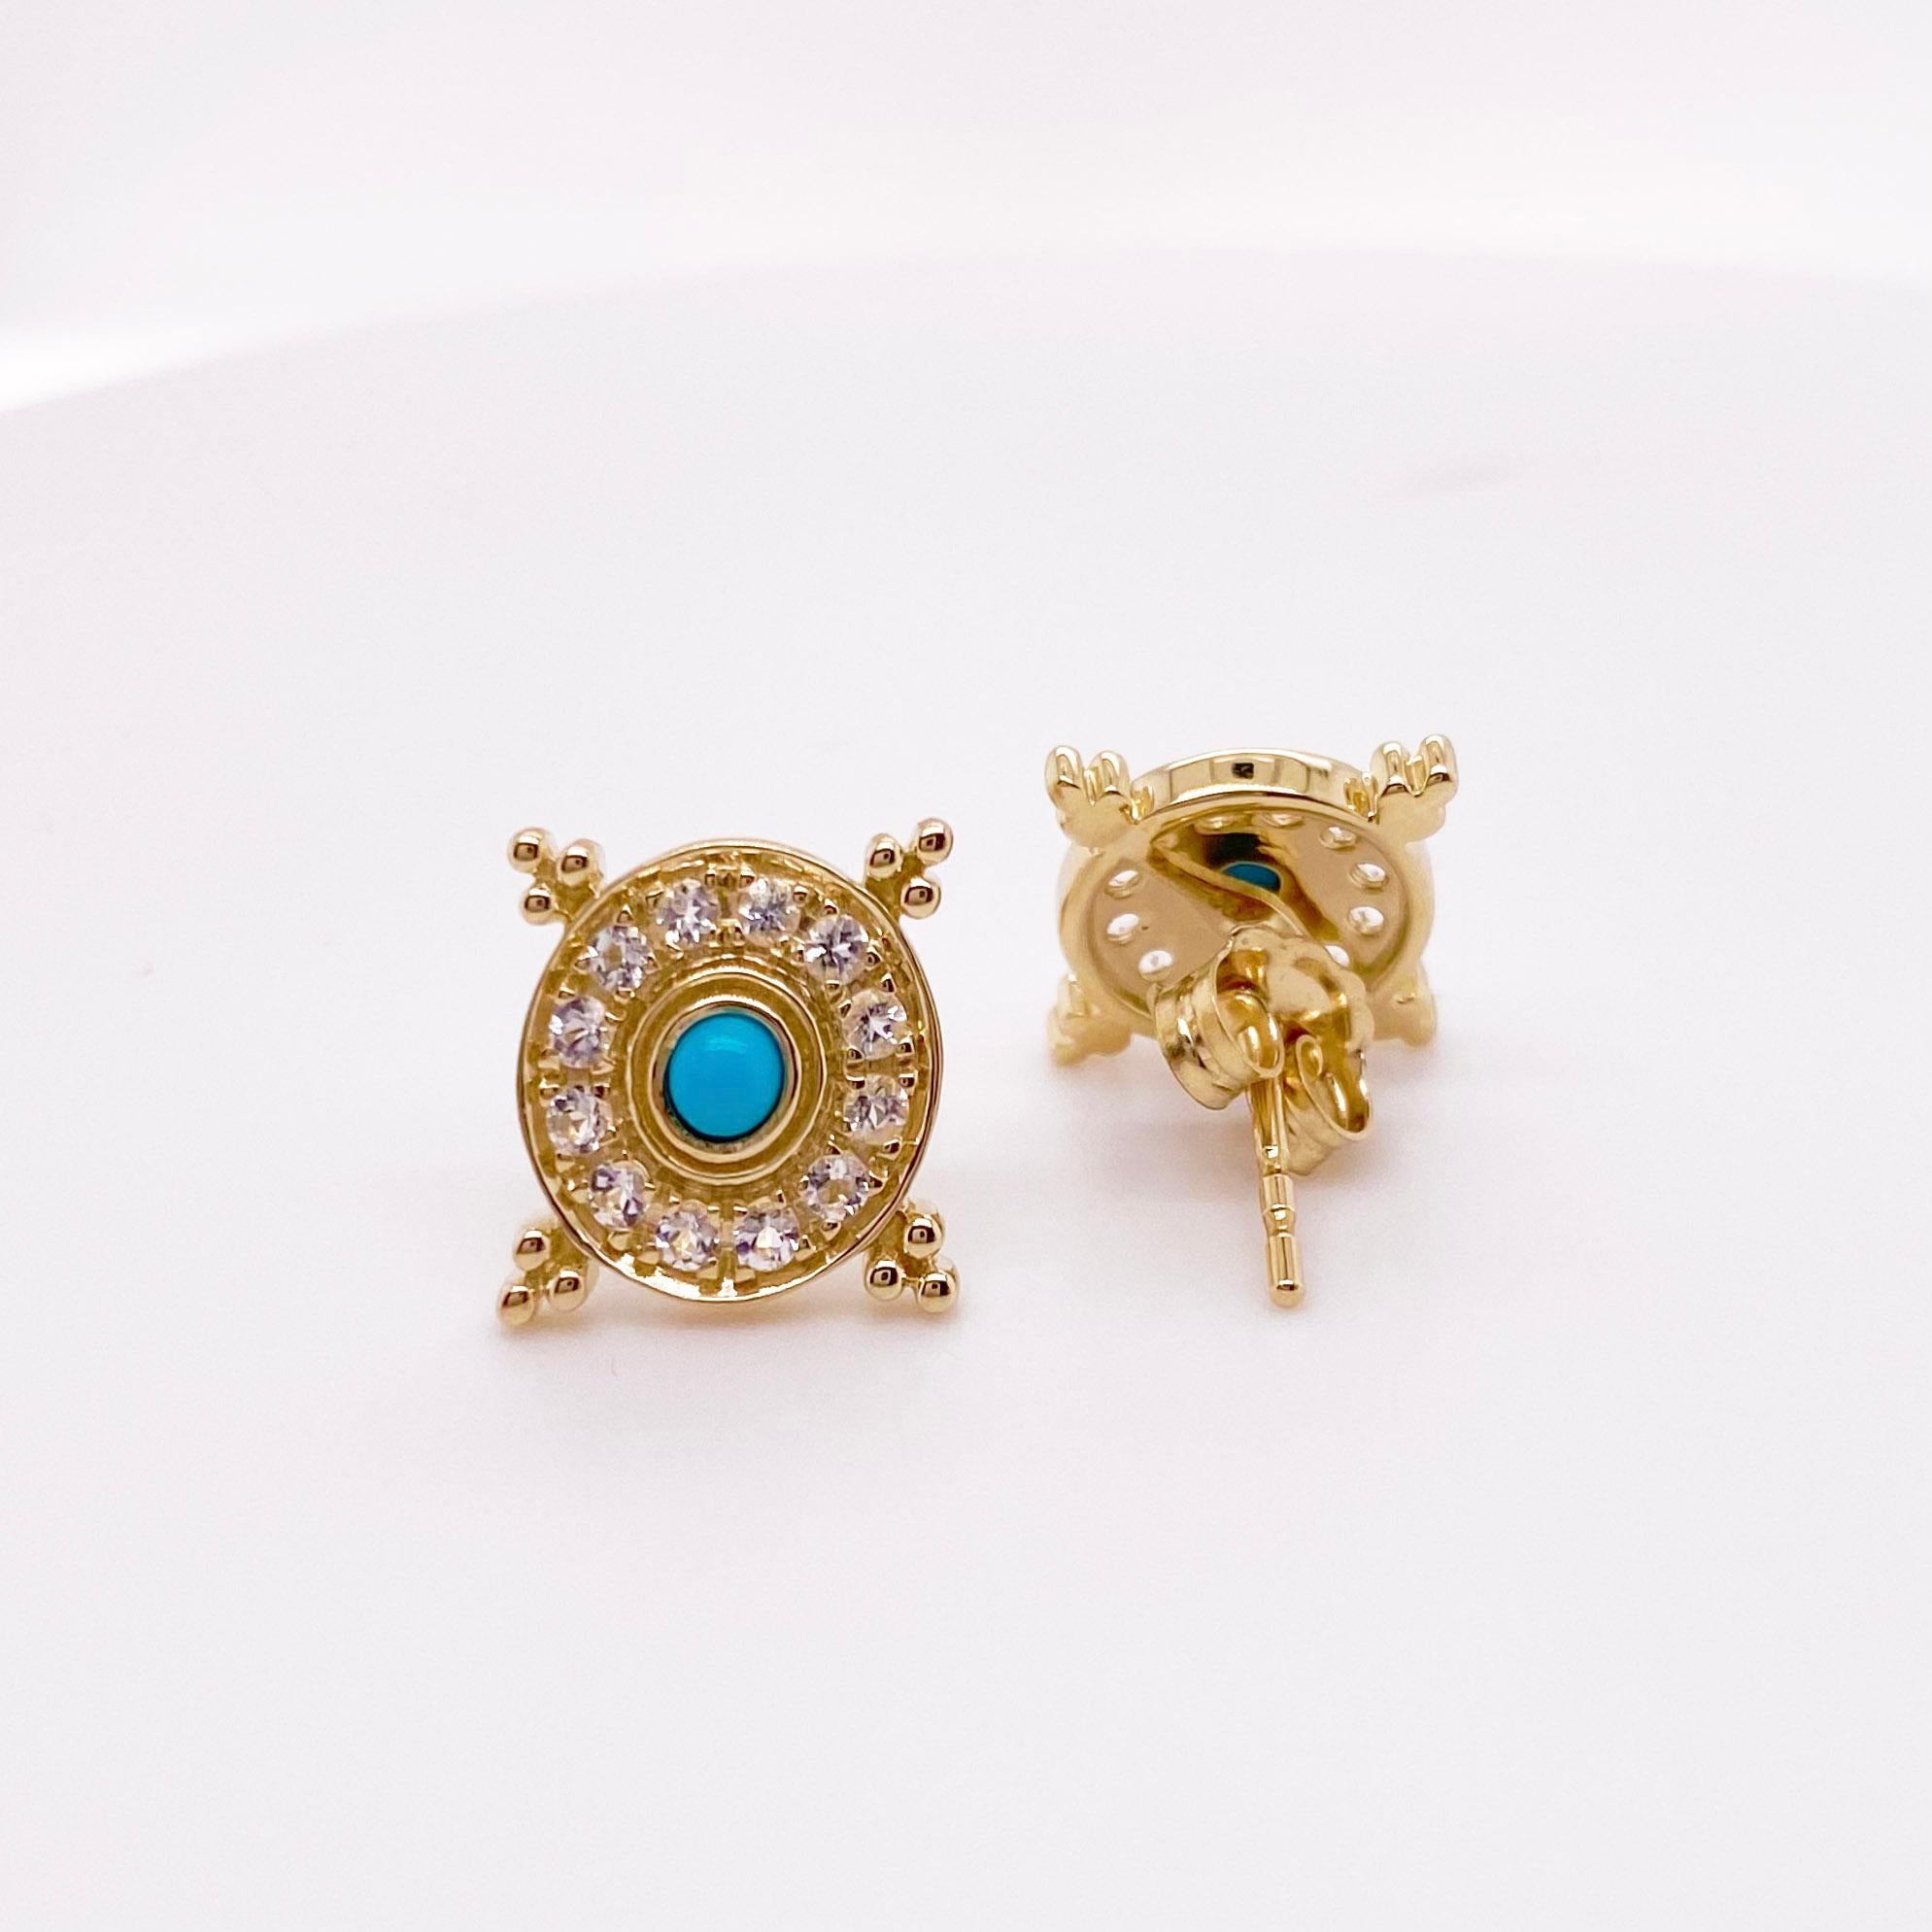 These turquoise earrings have an amazing Etruscan detailing with nice size topaz gems surrounding the turquoise. The earrings are solid 14 karat gold with 14 karat gold posts and backs. The details for these gorgeous earrings are listed below:
Metal